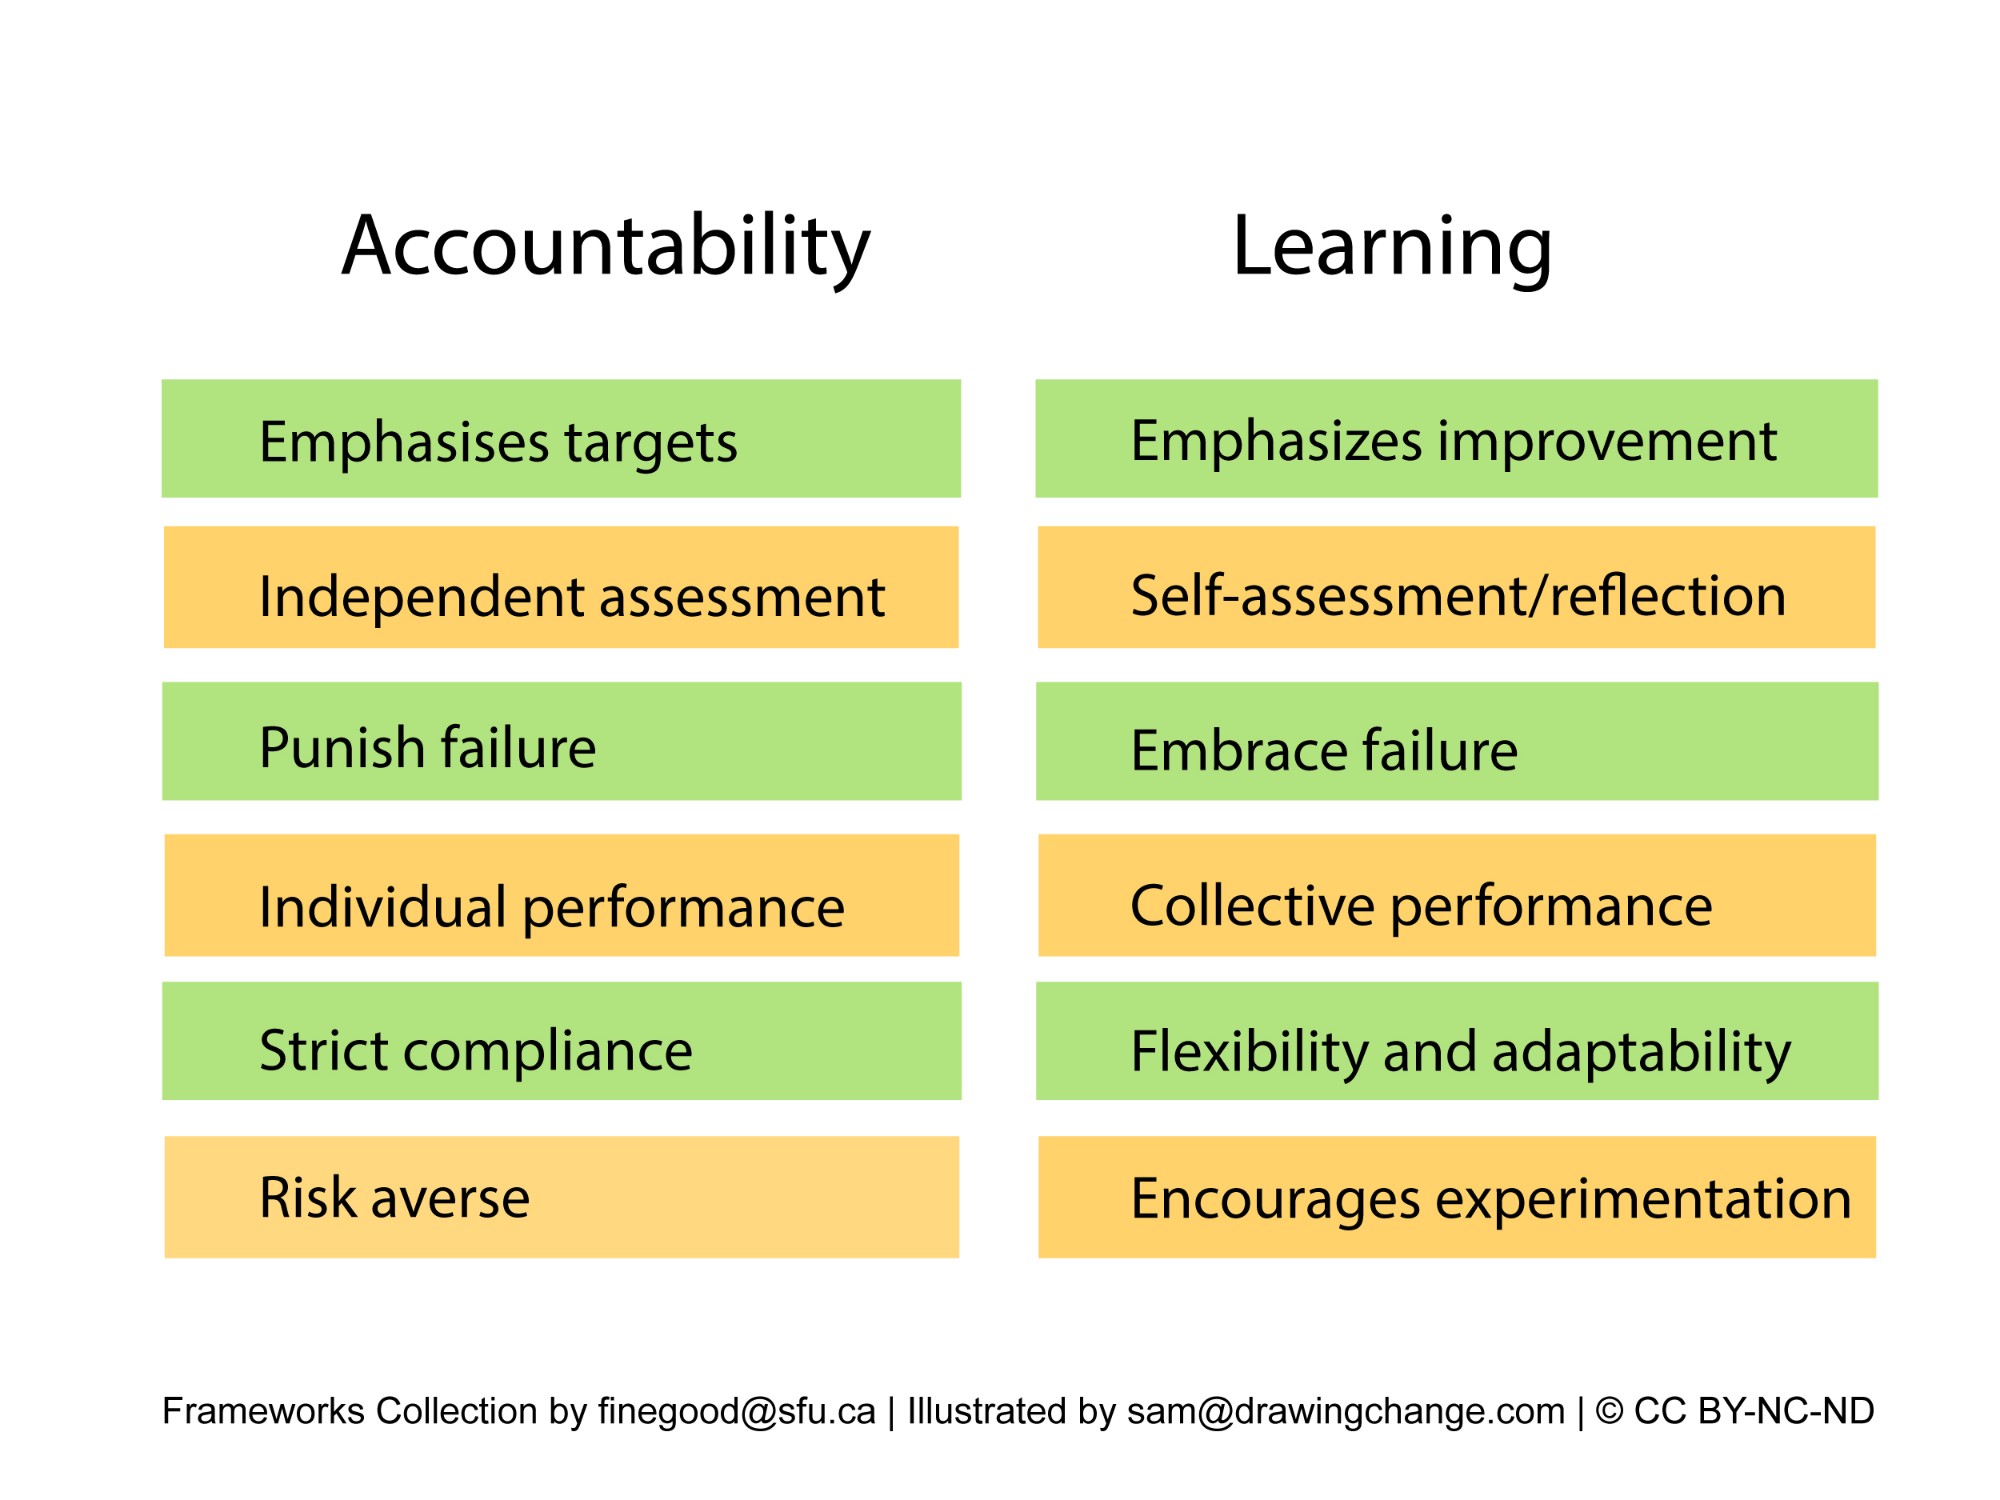 The image is an infographic comparing two concepts: Accountability and Learning. It's divided into two columns with distinct headings and icons.  On the left side, under the heading "Accountability," there are six characteristics listed, each with a corresponding colored box. From top to bottom, the characteristics are: Emphasizes targets, Independent assessment, Punish failure, Individual performance, Strict compliance, and Risk averse. The column has an icon depicting a figure aiming at a target, symbolizing precision and goal orientation.  On the right side, the heading "Learning" lists six contrasting characteristics: Emphasizes improvement, Self-assessment/reflection, Embrace failure, Collective performance, Flexibility and adaptability, and Encourages experimentation. The Learning column's icon shows a happy figure reaching for a star, holding a clipboard, which implies achievement and growth.  The bottom of the image attributes the source as "Frameworks Collection by finegood@sfu.ca" and is illustrated by "sam@drawingchange.com". It also indicates that the image is licensed under "CC BY-NC-ND", which means it is under a Creative Commons license that allows for non-commercial use and no derivatives.  Colors are used to differentiate the two columns and their corresponding characteristics, with yellow and green hues for each row. The design is clean and simple, intended for educational or professional use to illustrate the differences between a focus on accountability and a focus on learning within organizations or systems.